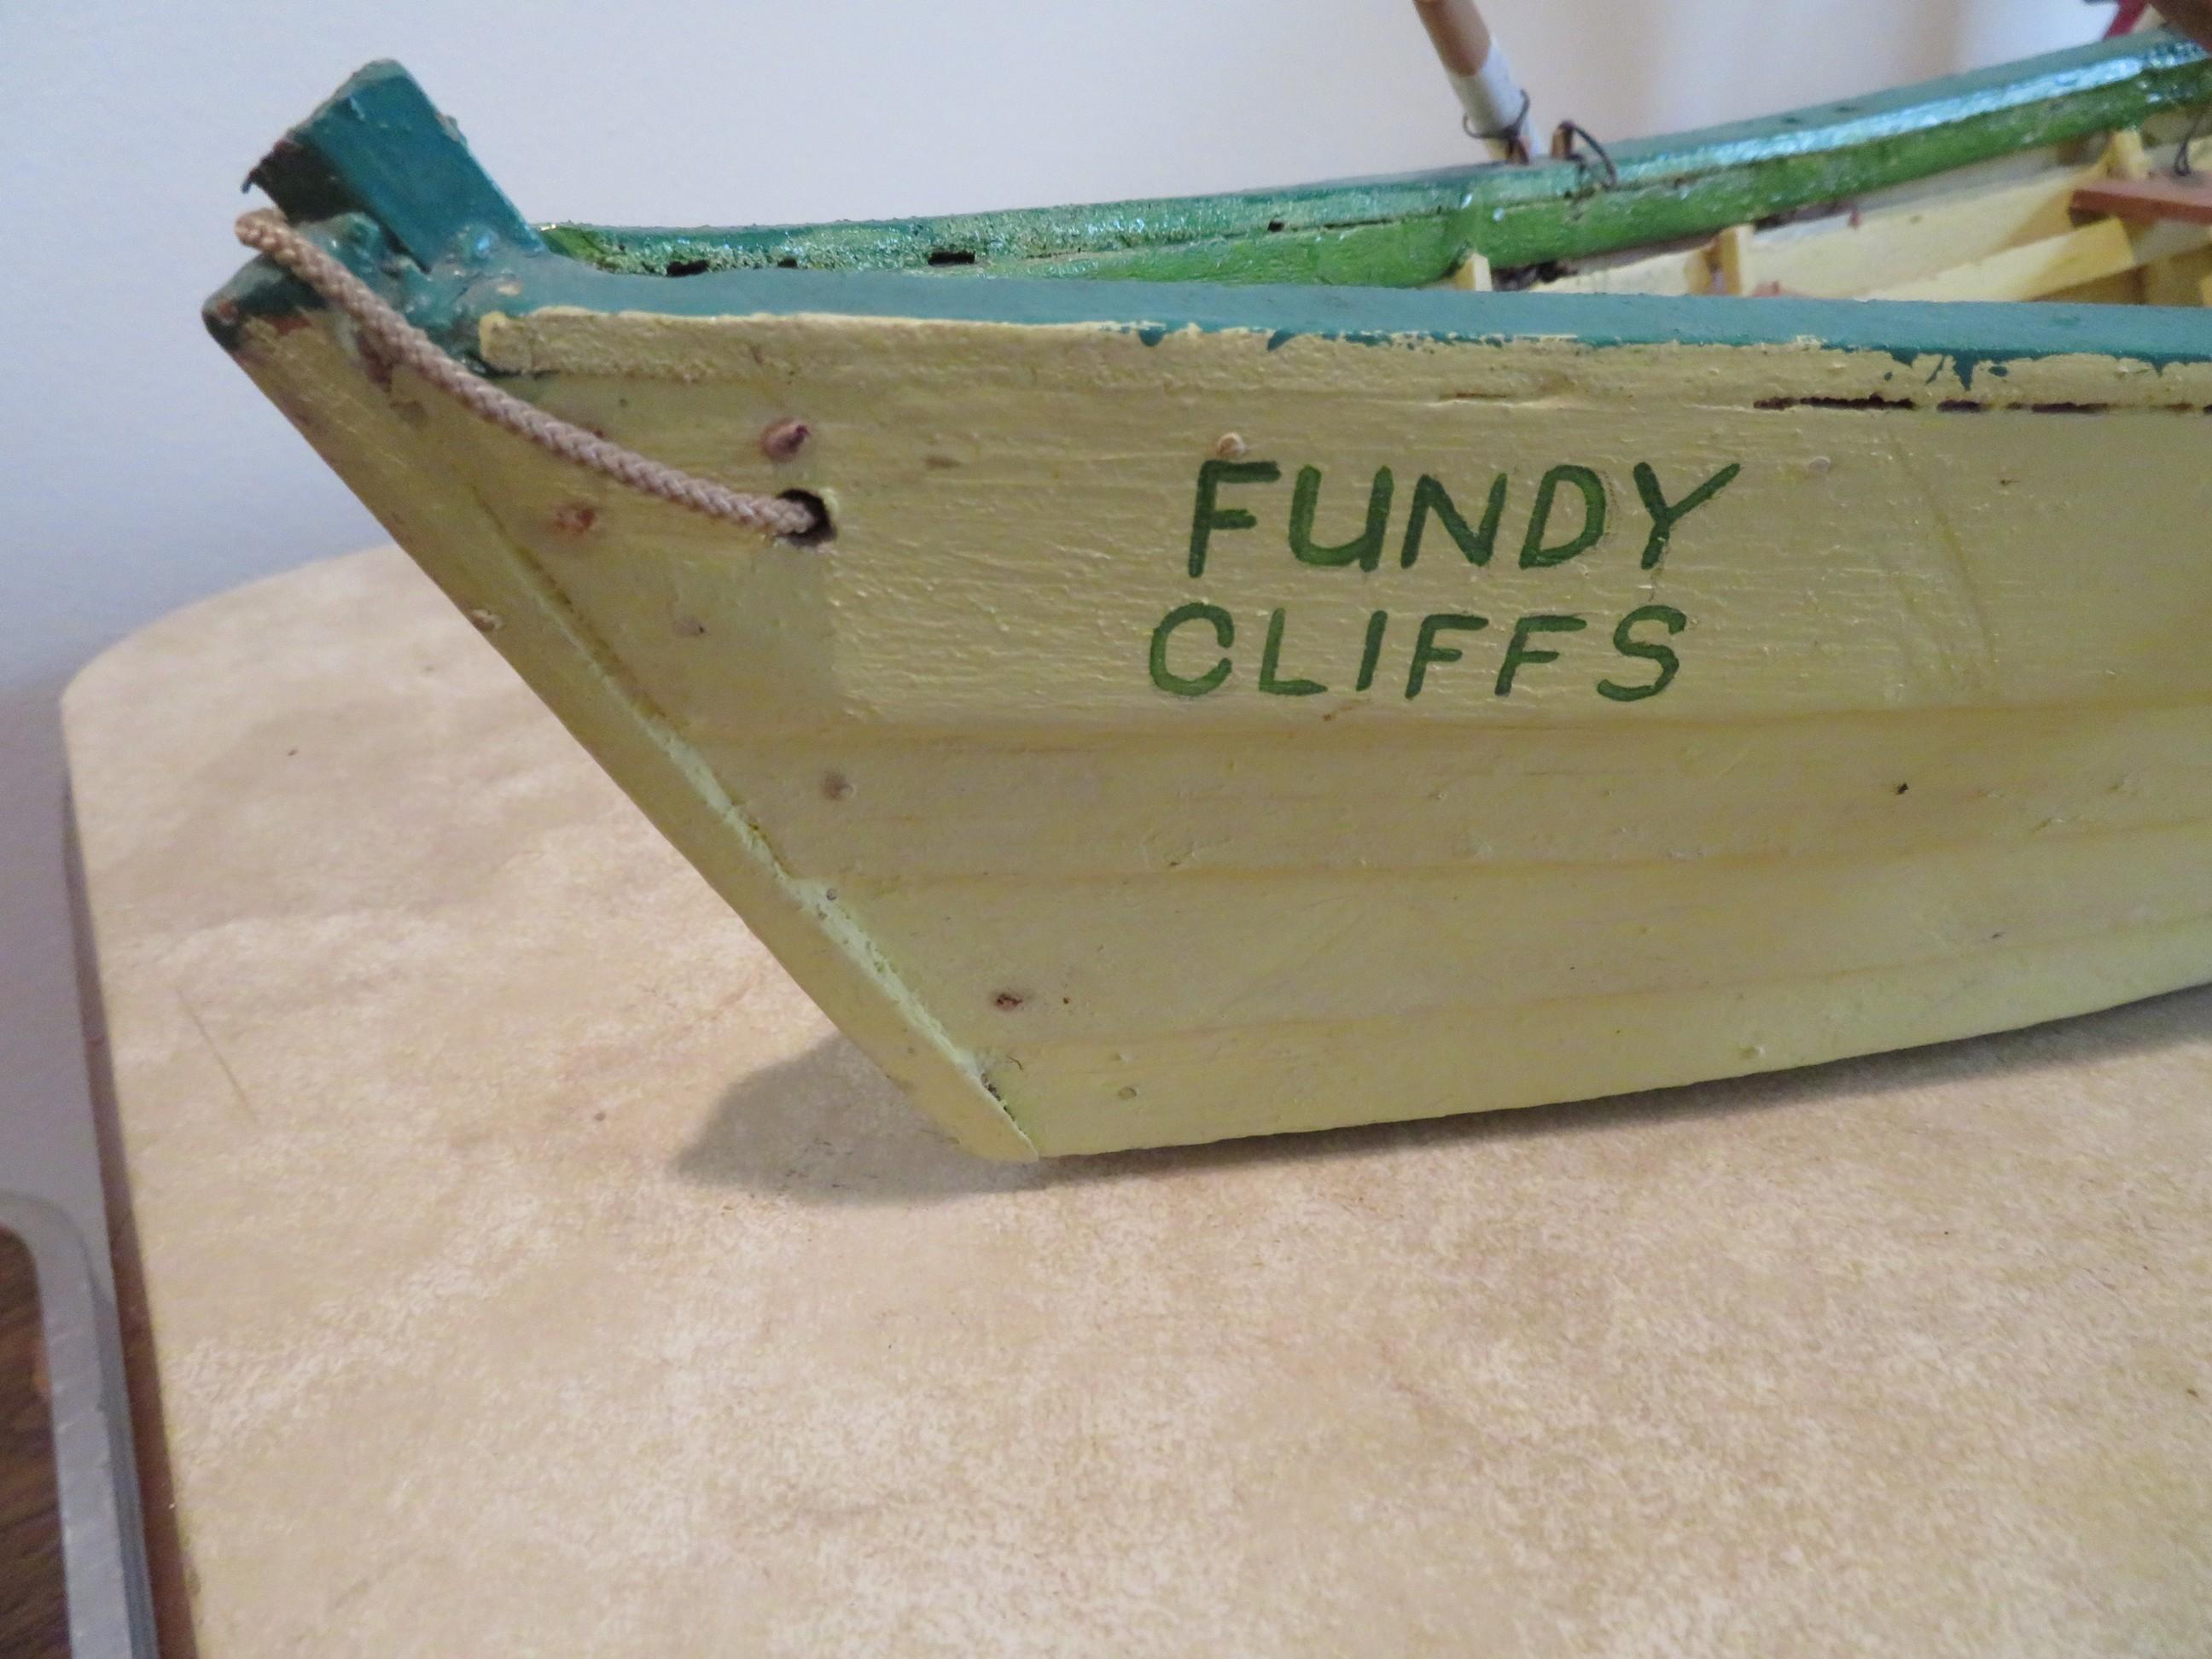 Ship in a bottle"Sybella of Fire Island" and Row Boat "Fundy Cliffs" 19" in